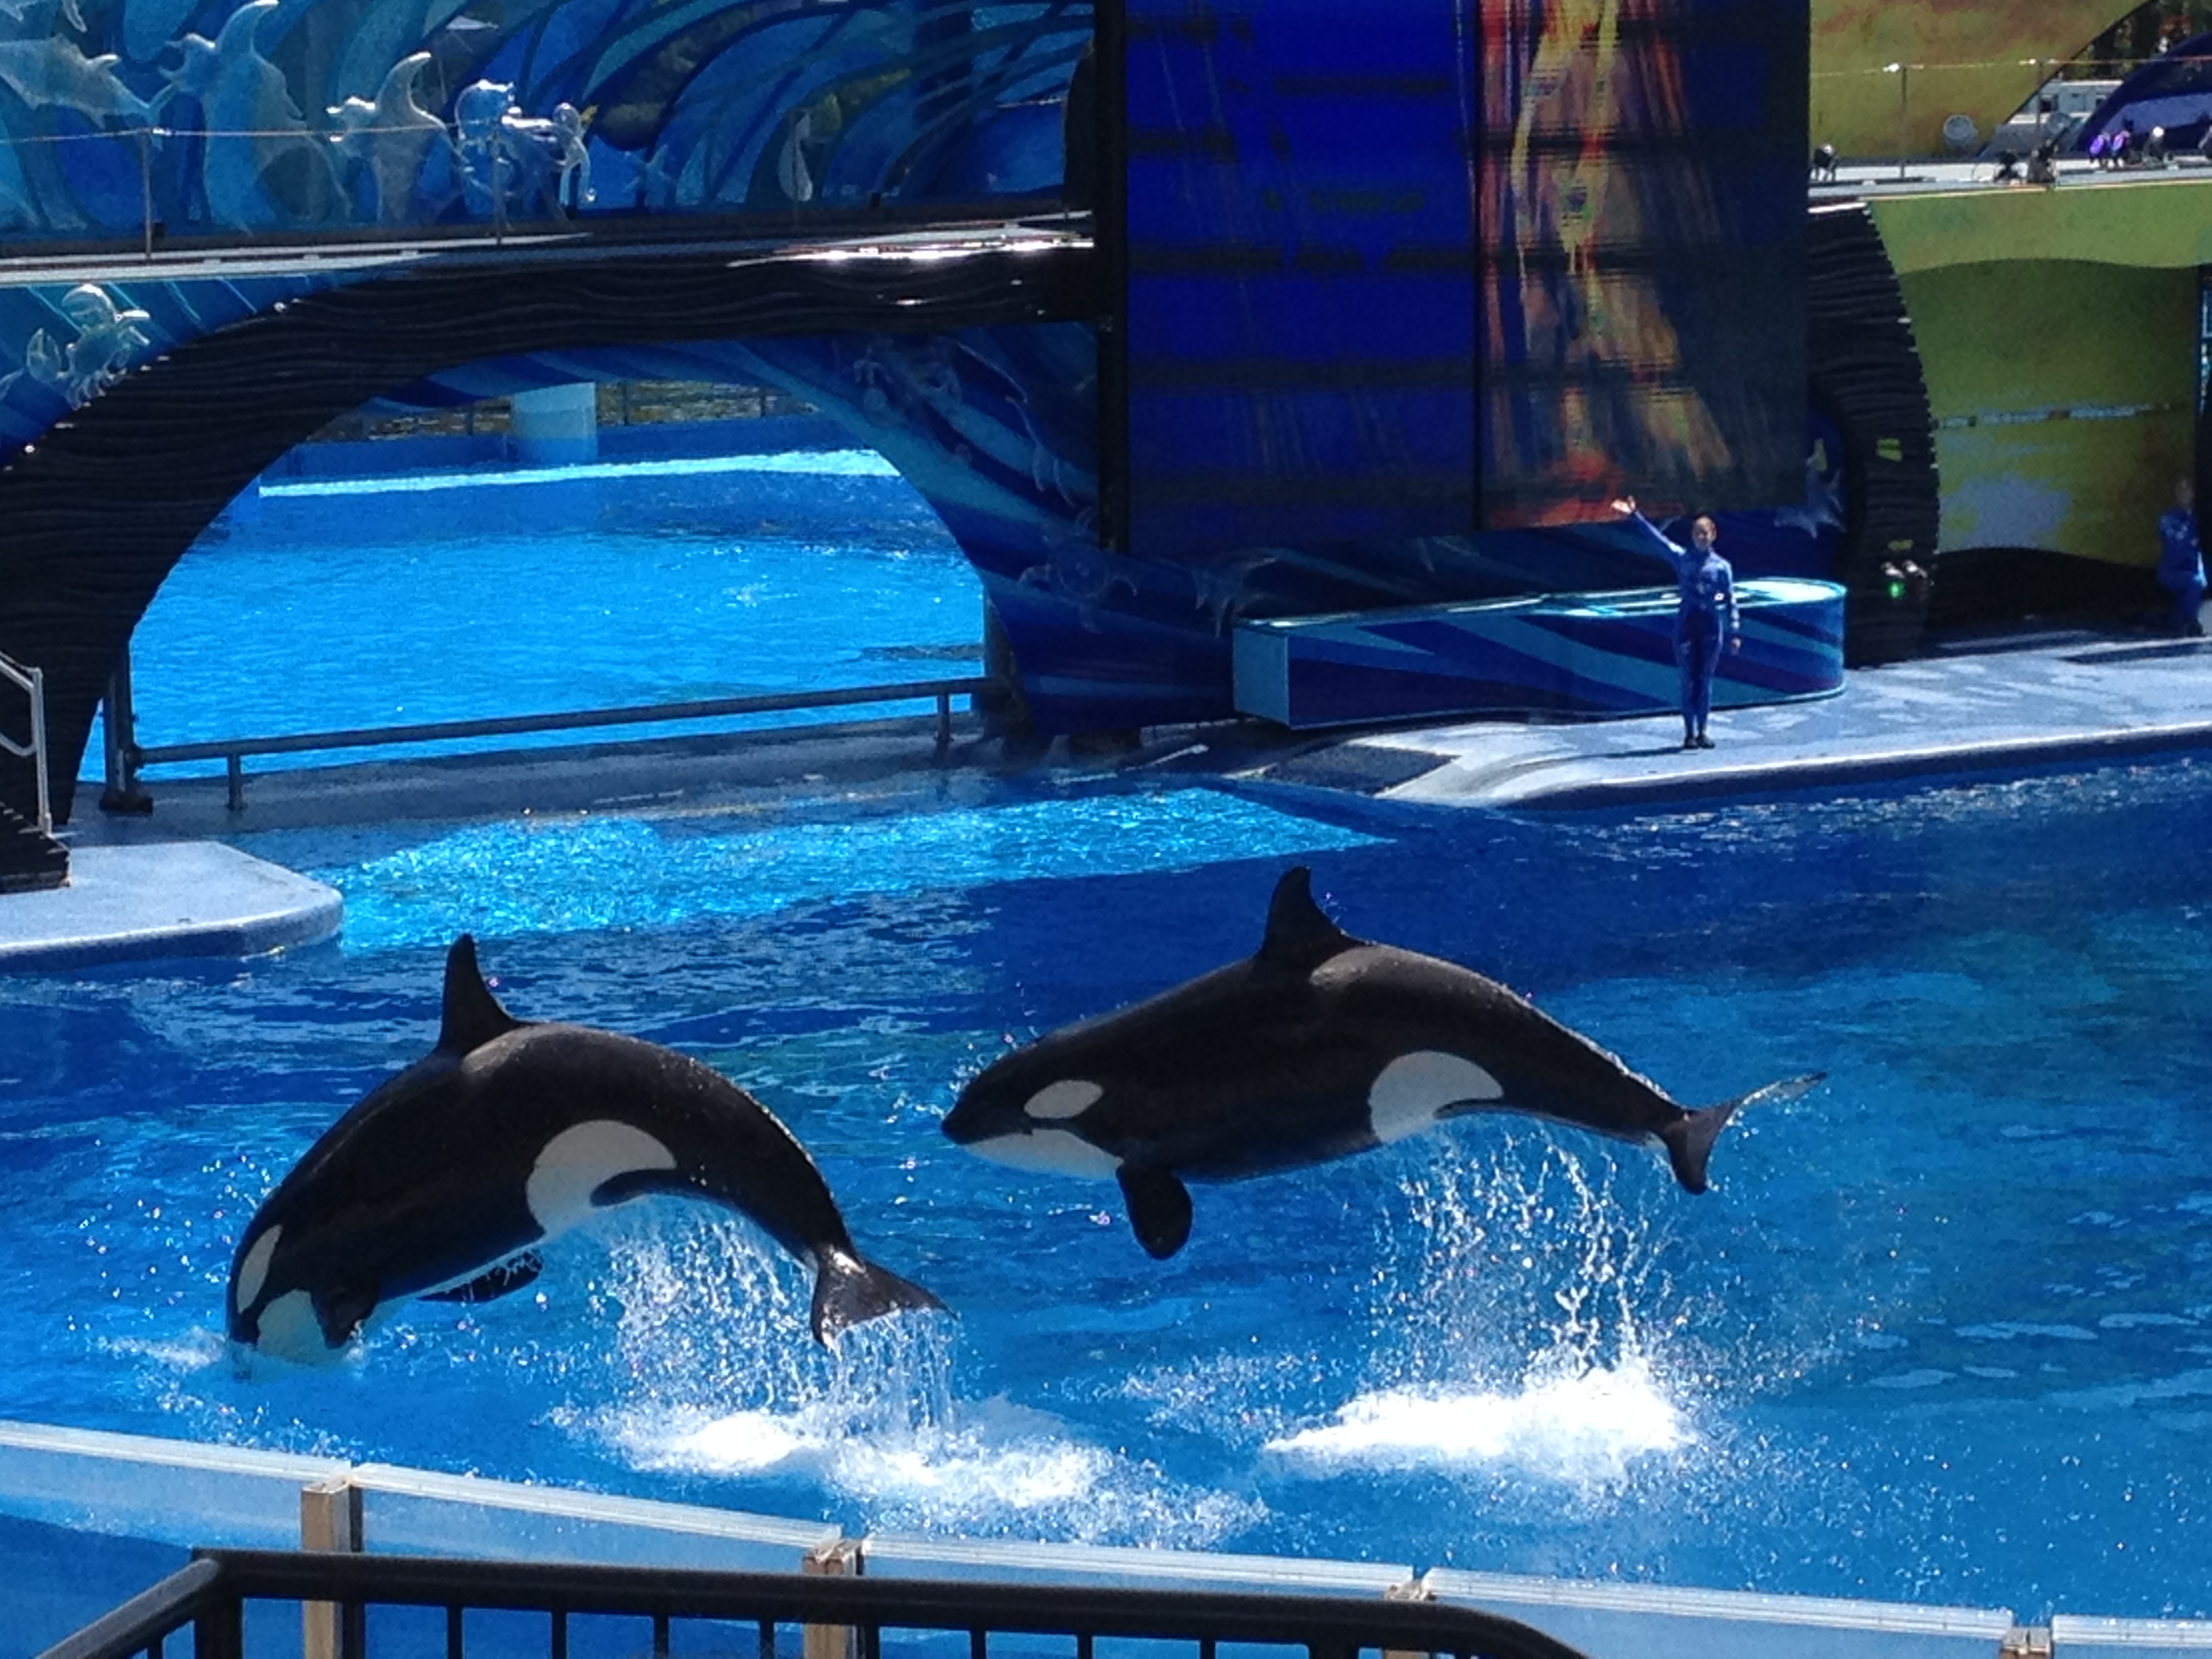 How to Save at SeaWorld | $10 off Tickets + Review